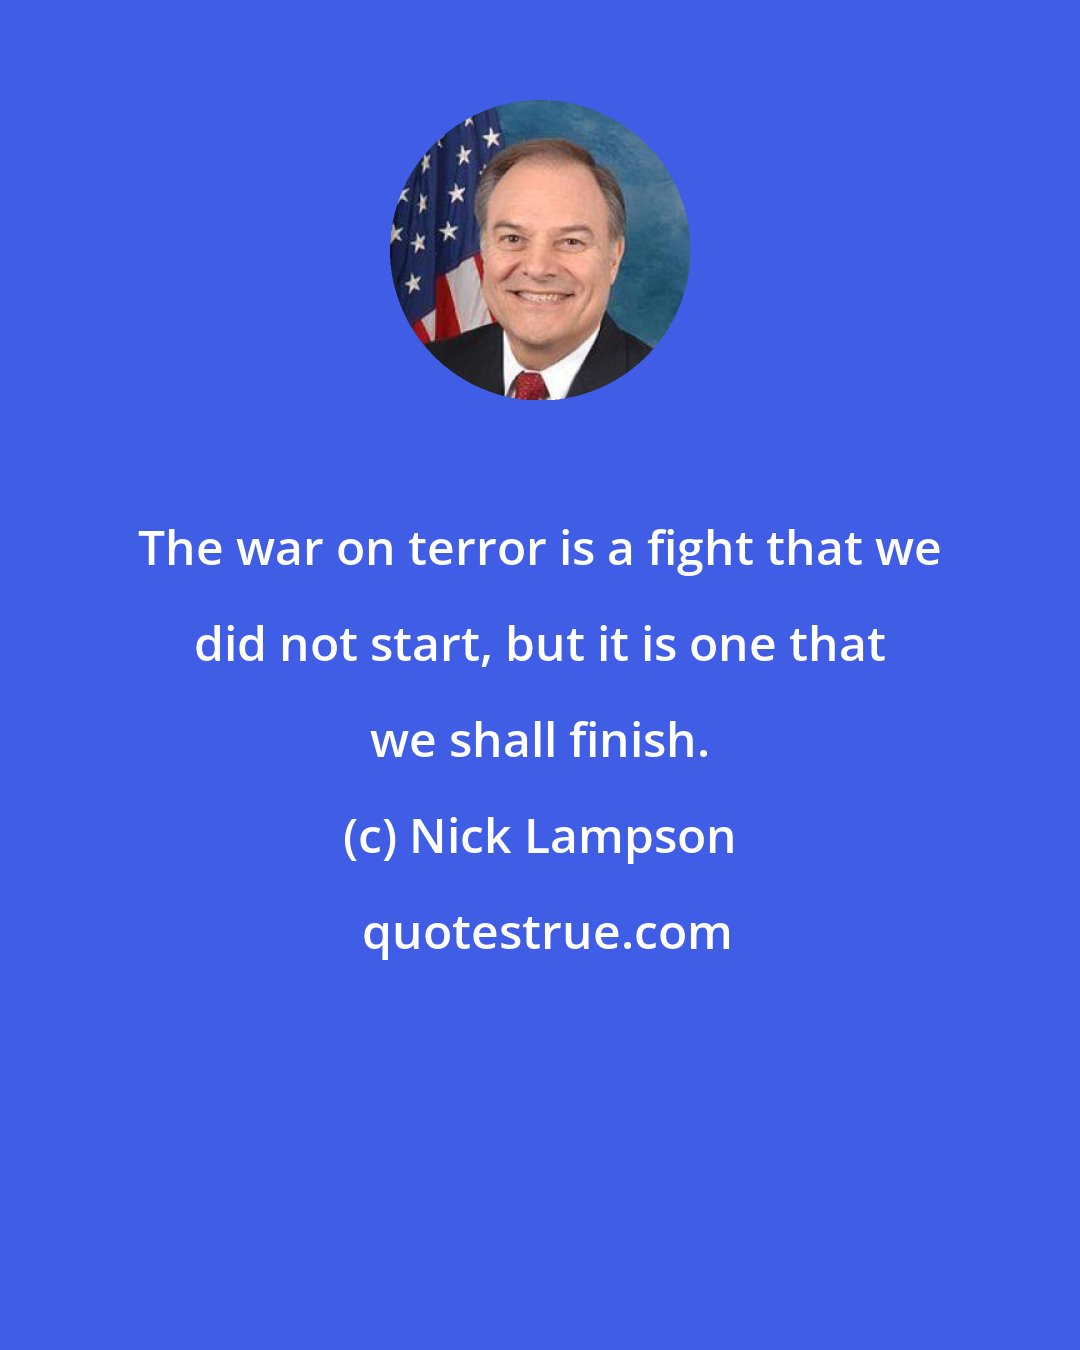 Nick Lampson: The war on terror is a fight that we did not start, but it is one that we shall finish.